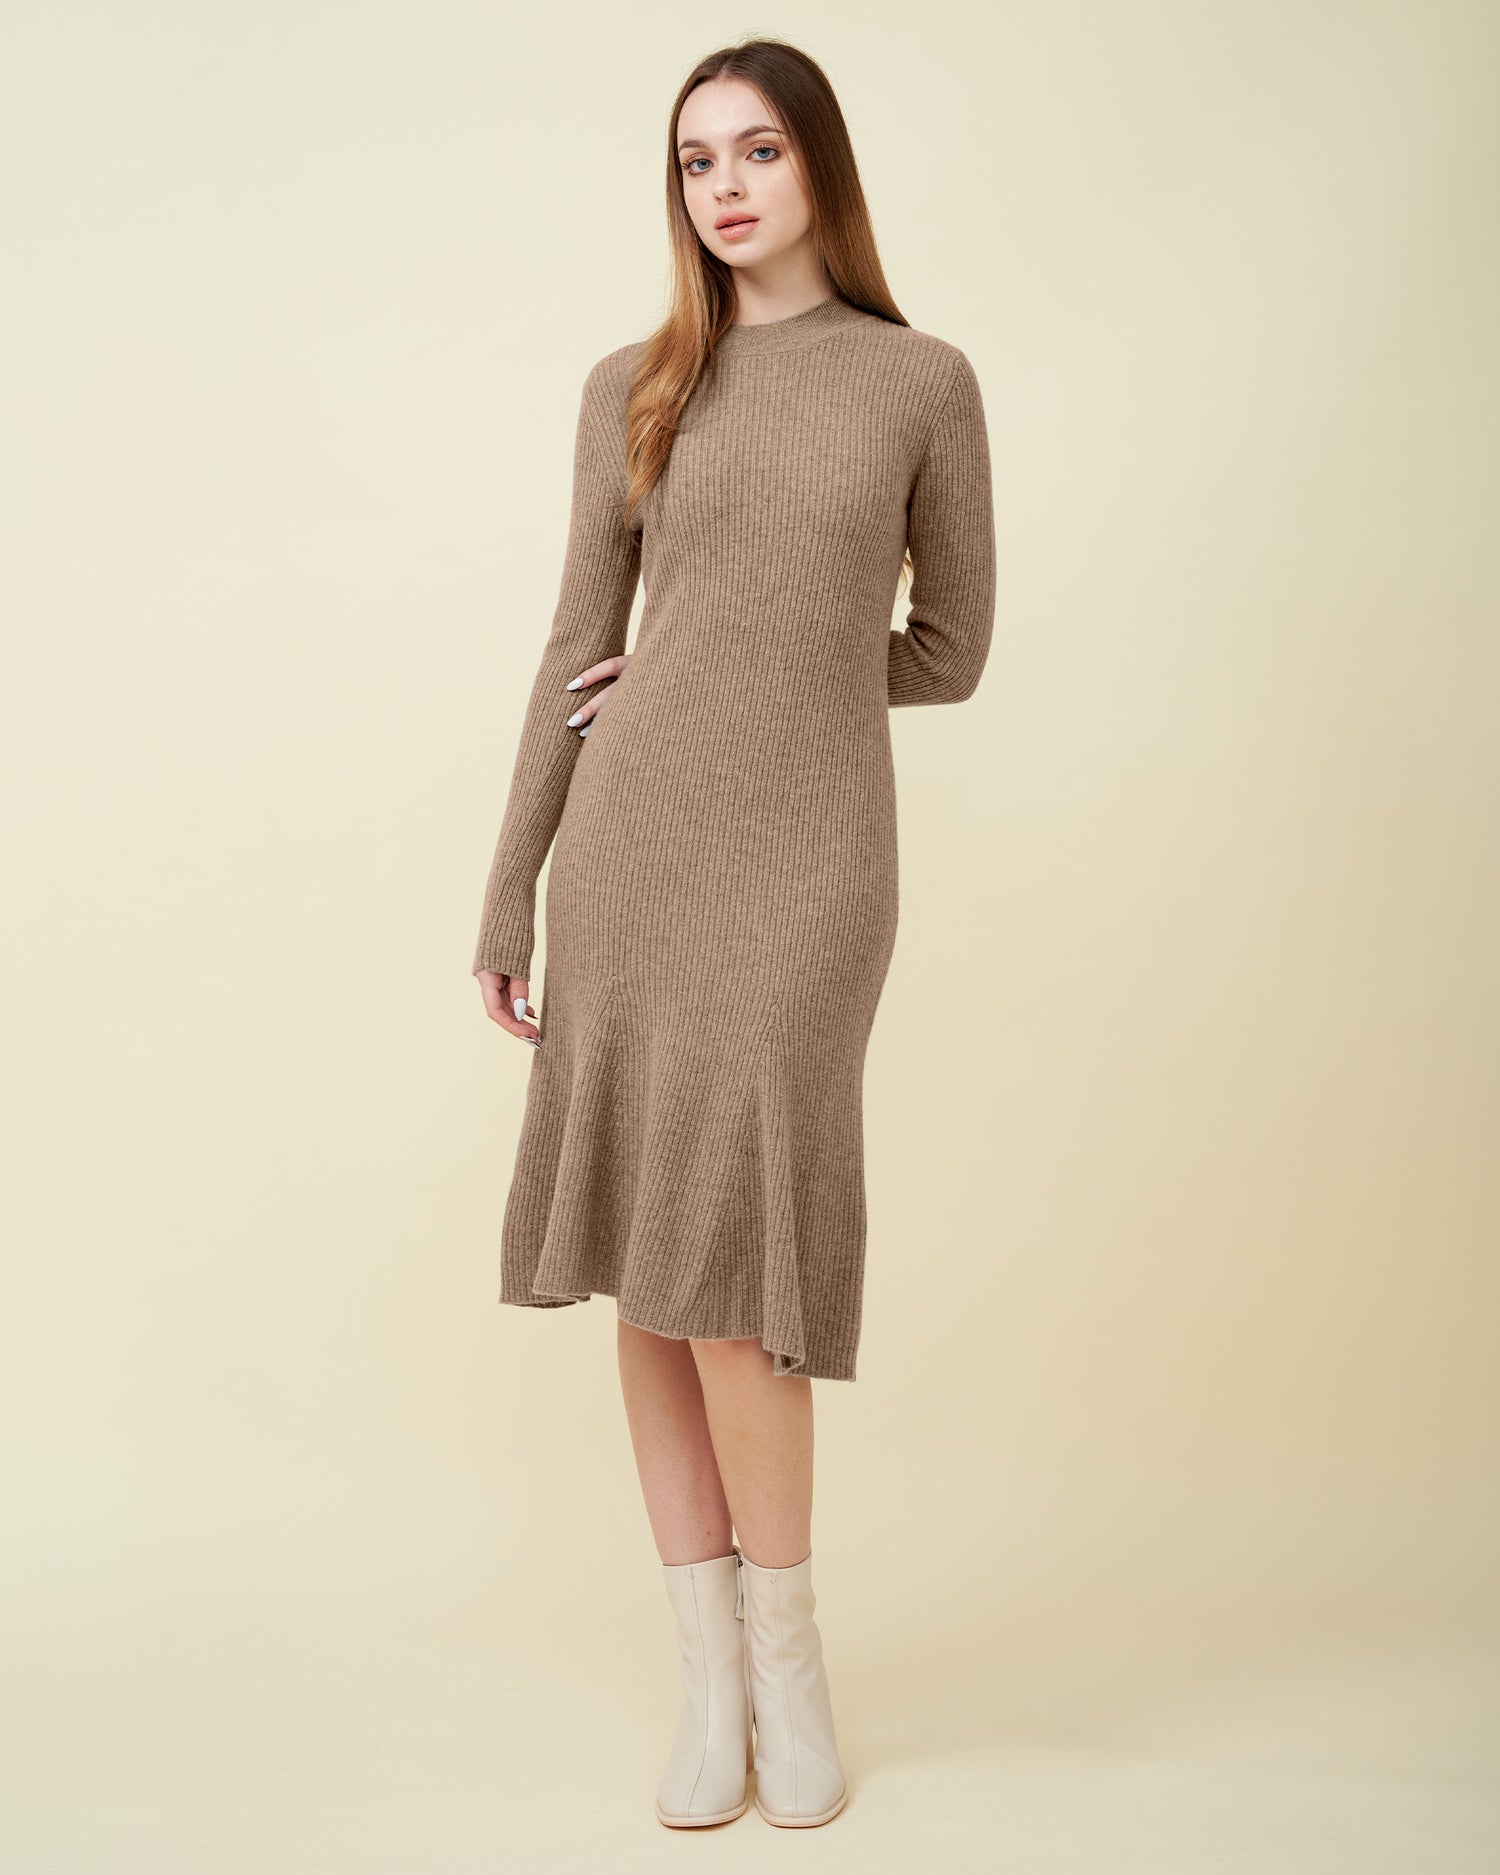 davinii wool sweater dress fashion style elegant style white boots turqouise classic colors wardrobe styling essentials